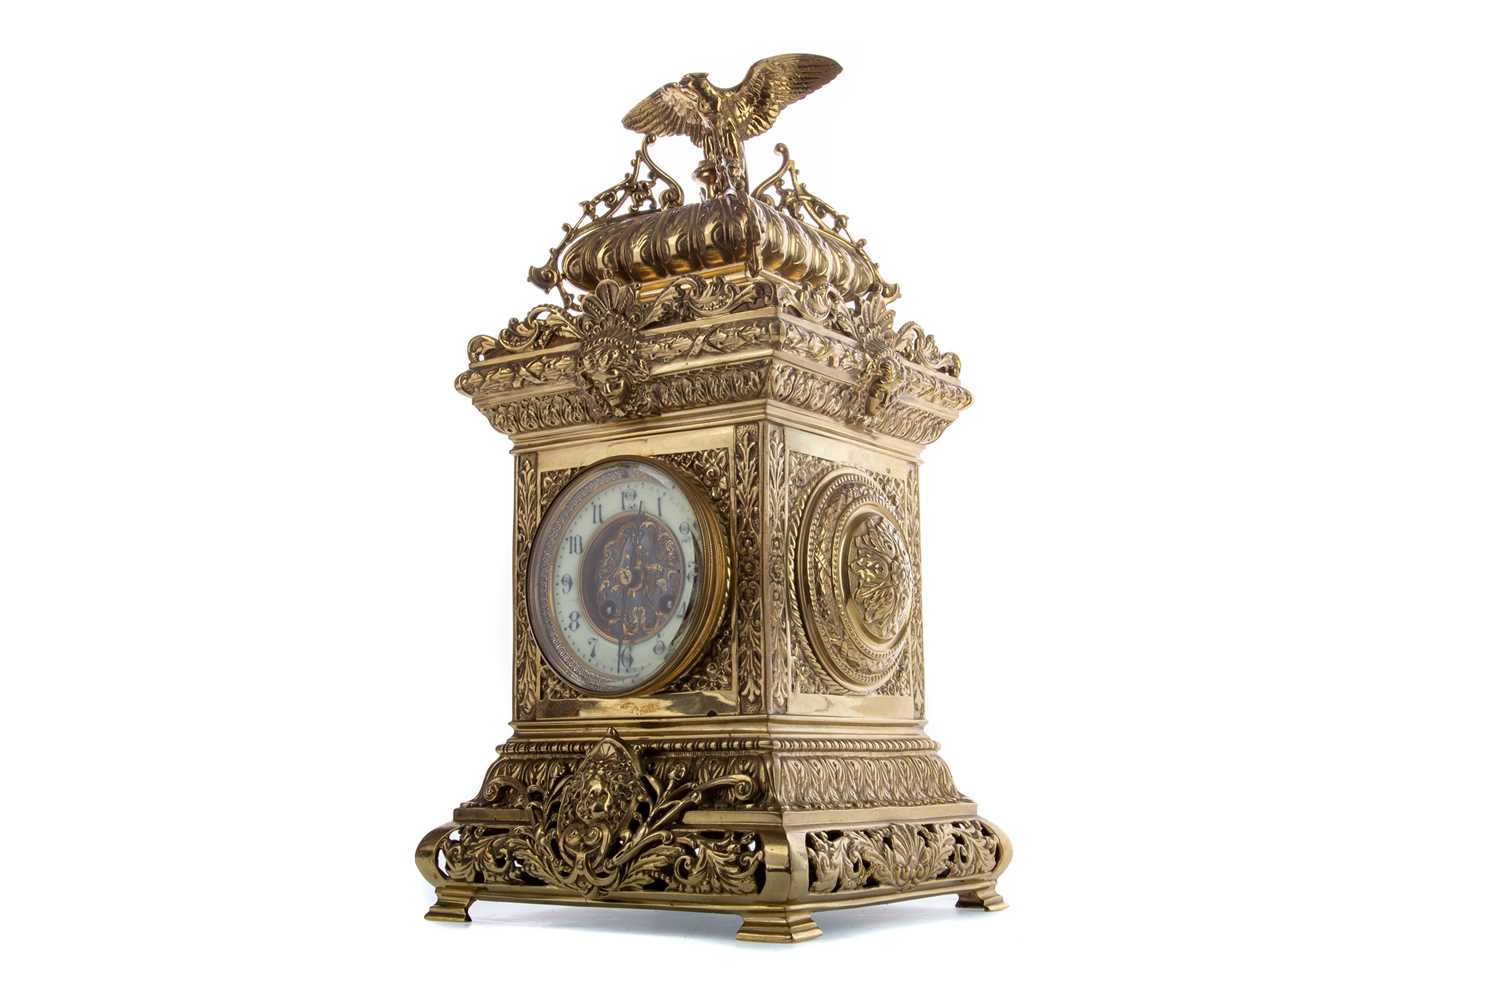 A LATE 19TH CENTURY FRENCH BRASS MANTEL CLOCK